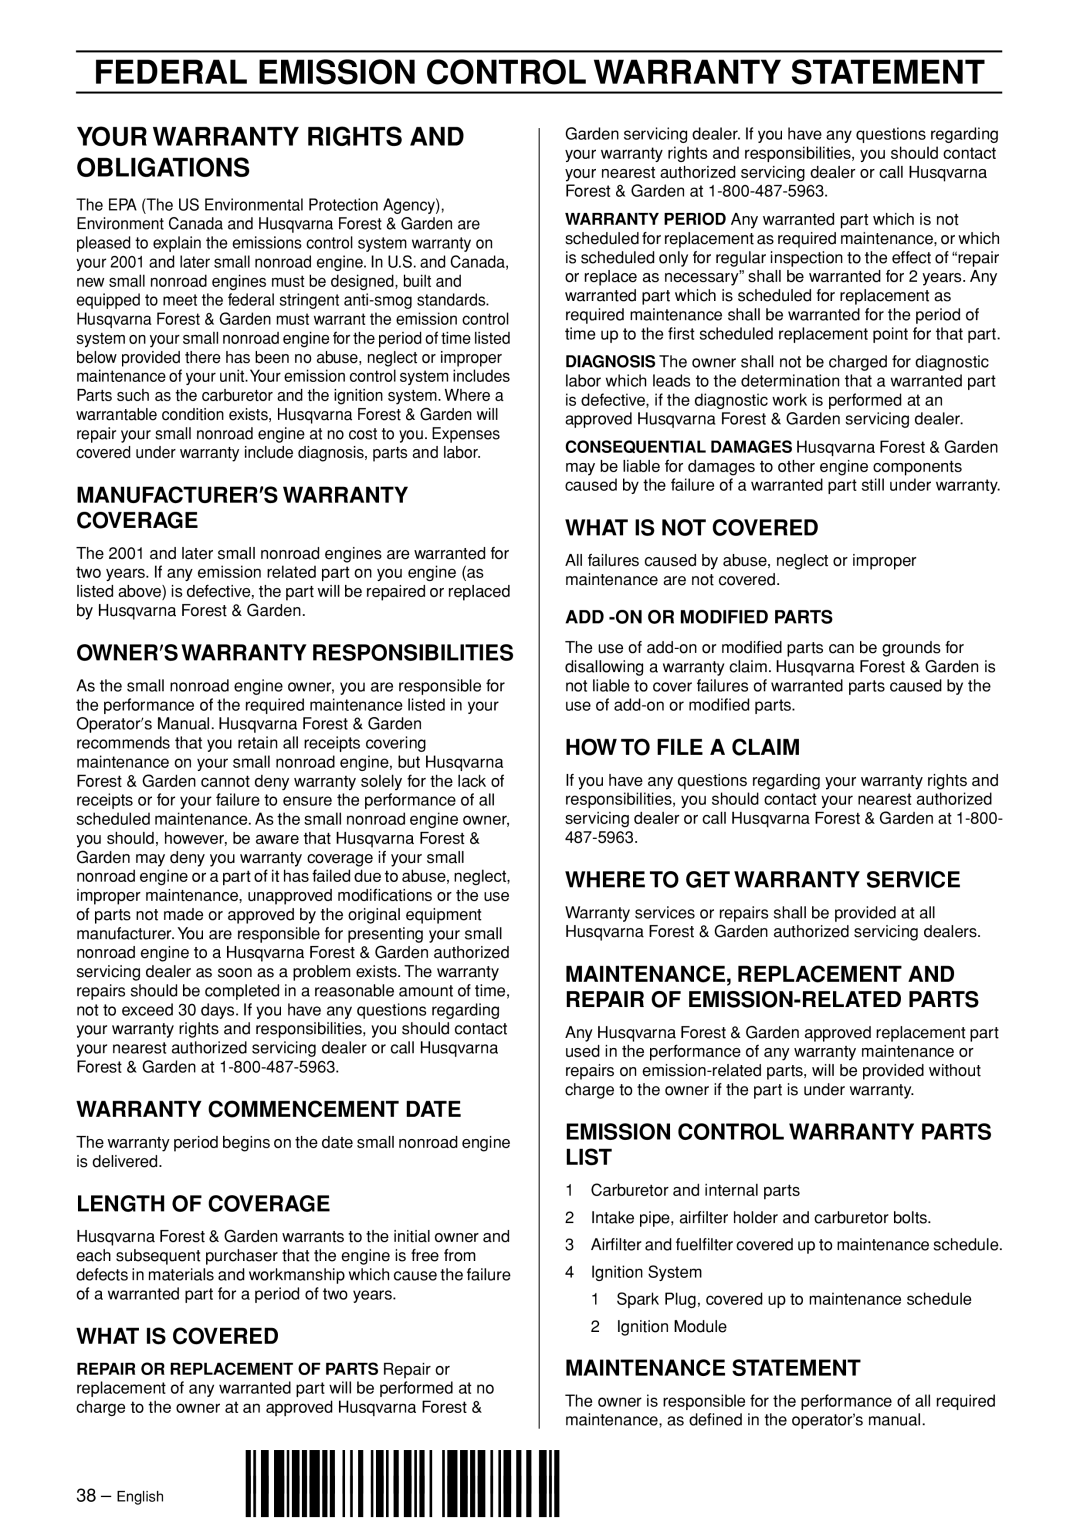 Husqvarna 336 manual Federal Emission Control Warranty Statement, Your Warranty Rights And Obligations, Length Of Coverage 